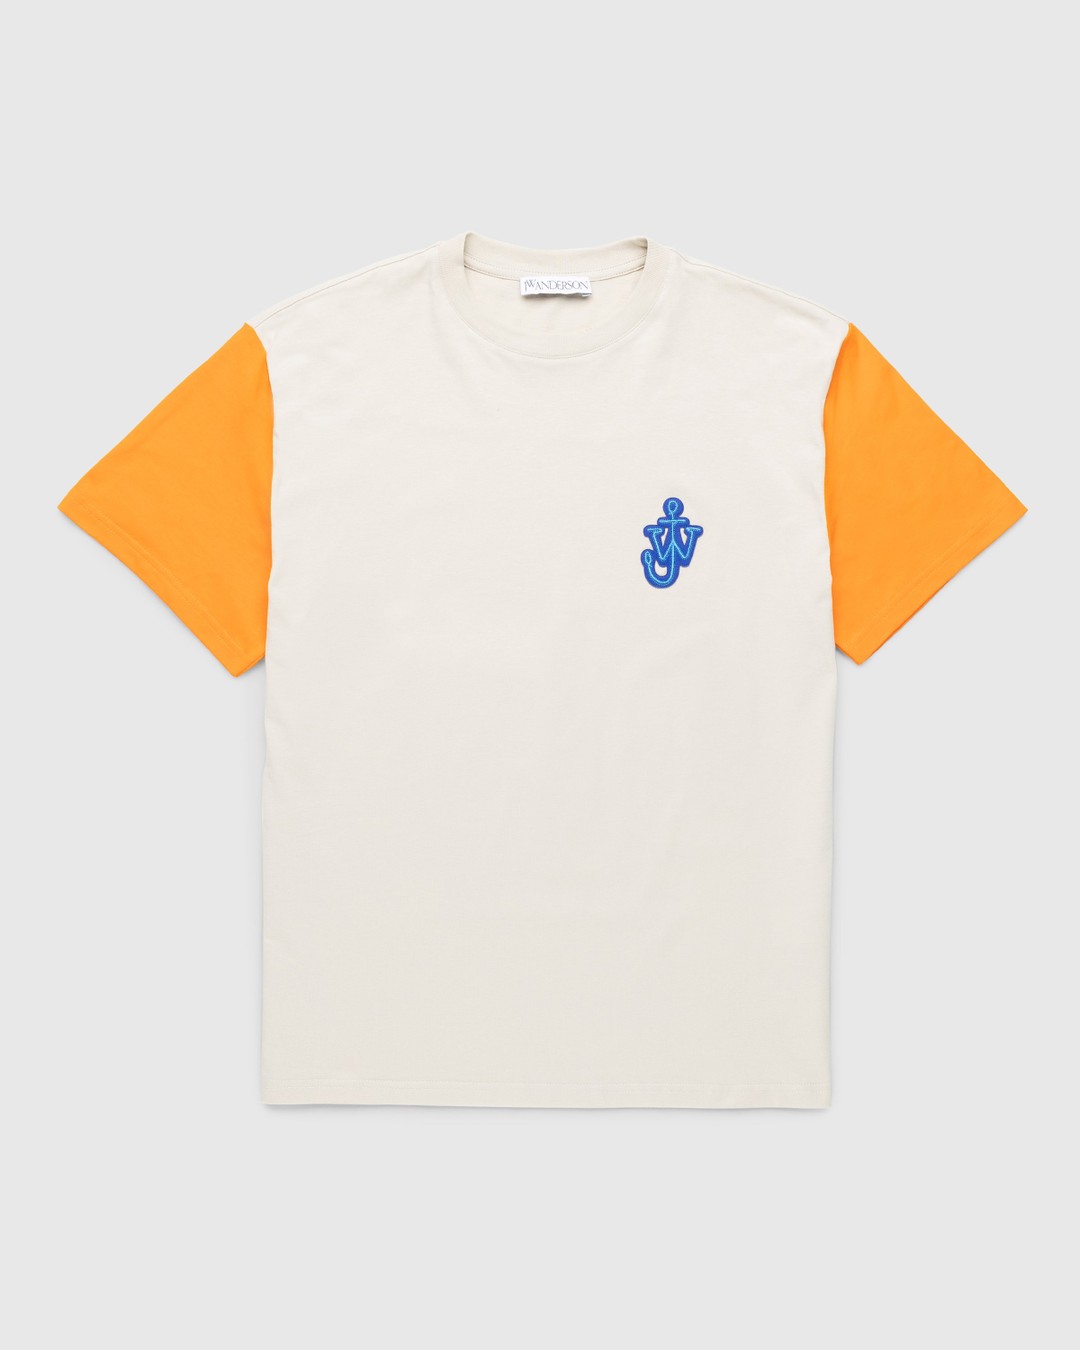 J.W. Anderson – Anchor Patch Contrast Sleeve T-Shirt - T-shirts - Orange - Image 1